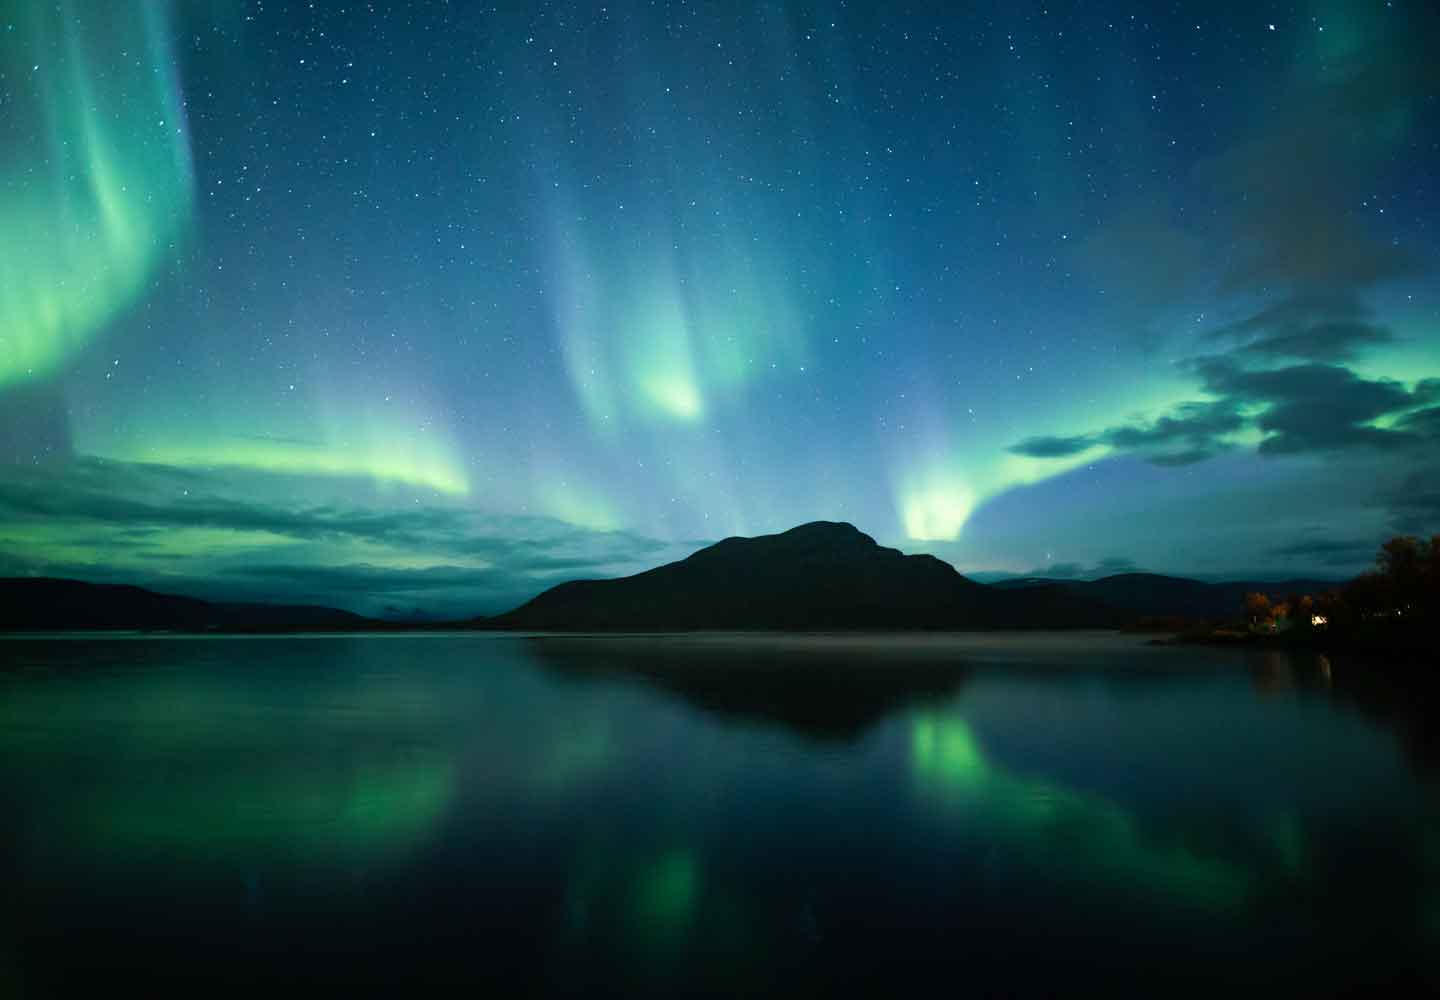 Though longer days may prevent them from being as common in the summer time, the Northern Lights can sometimes be seen in Sitka's skies.